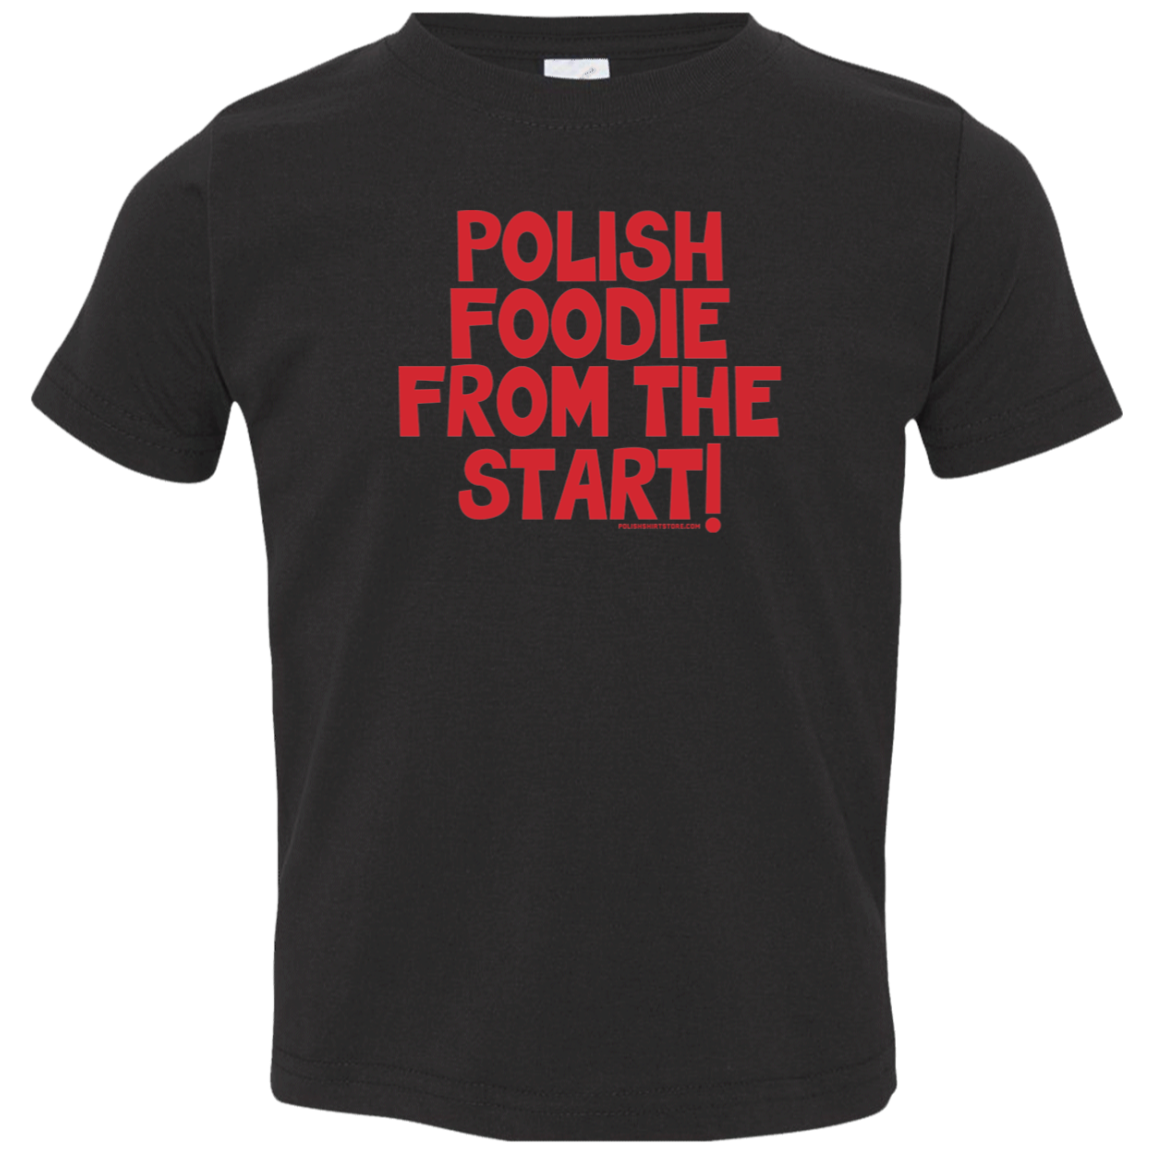 Polish Foodie From The Start Infant & Toddler T-Shirt Apparel CustomCat Toddler T-Shirt Black 2T